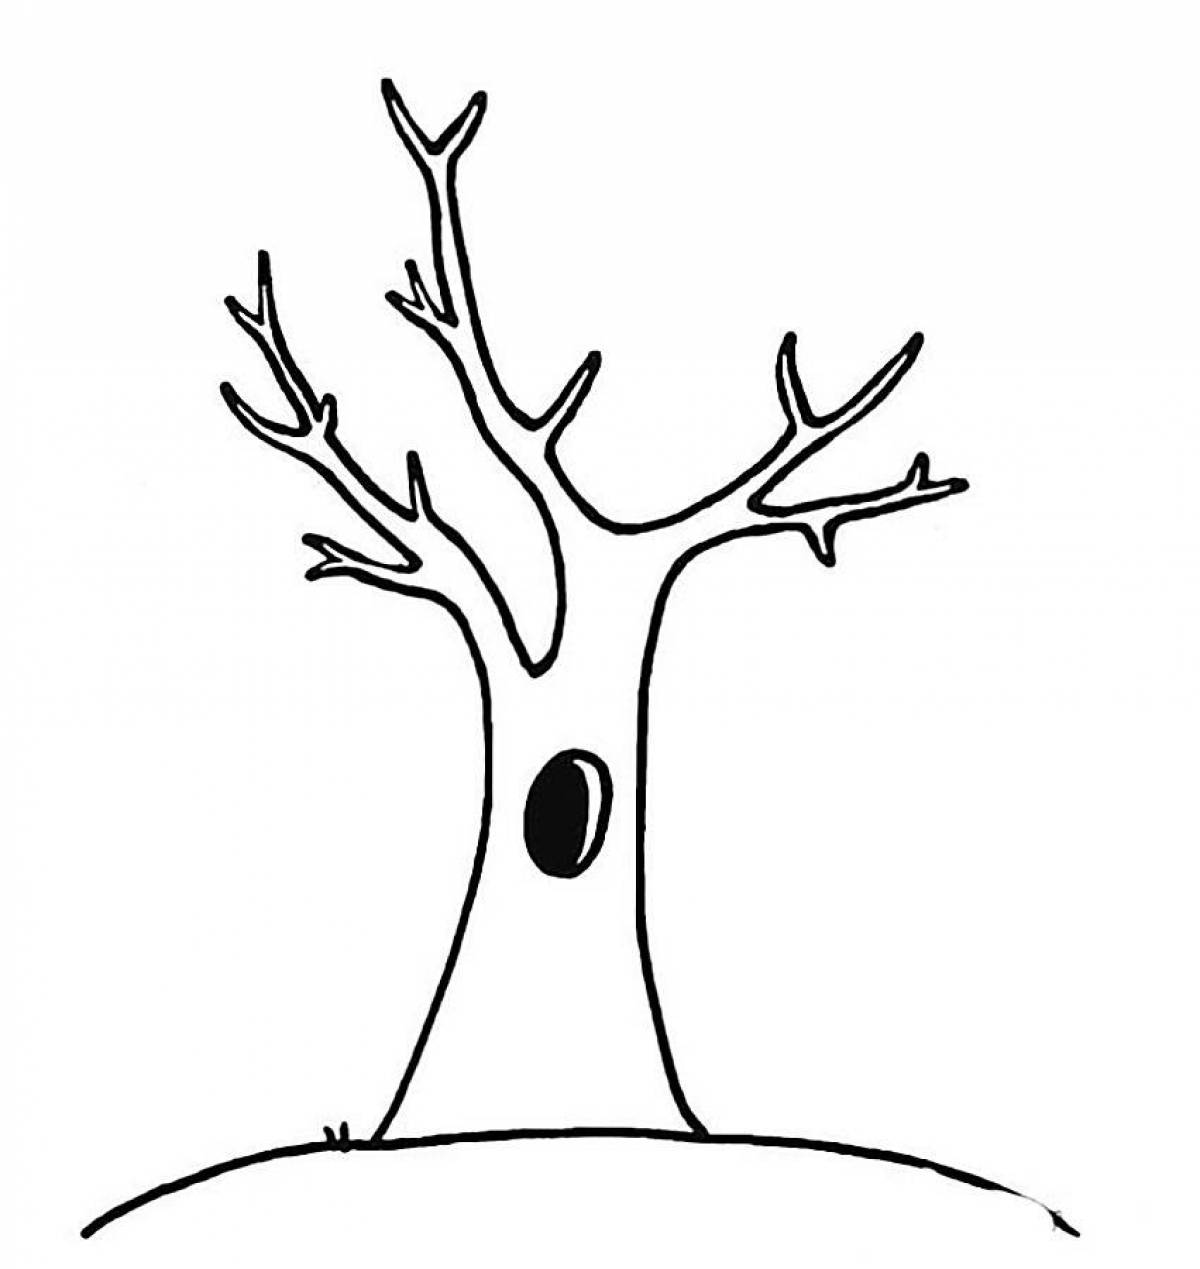 Coloring book joyful tree without leaves for children